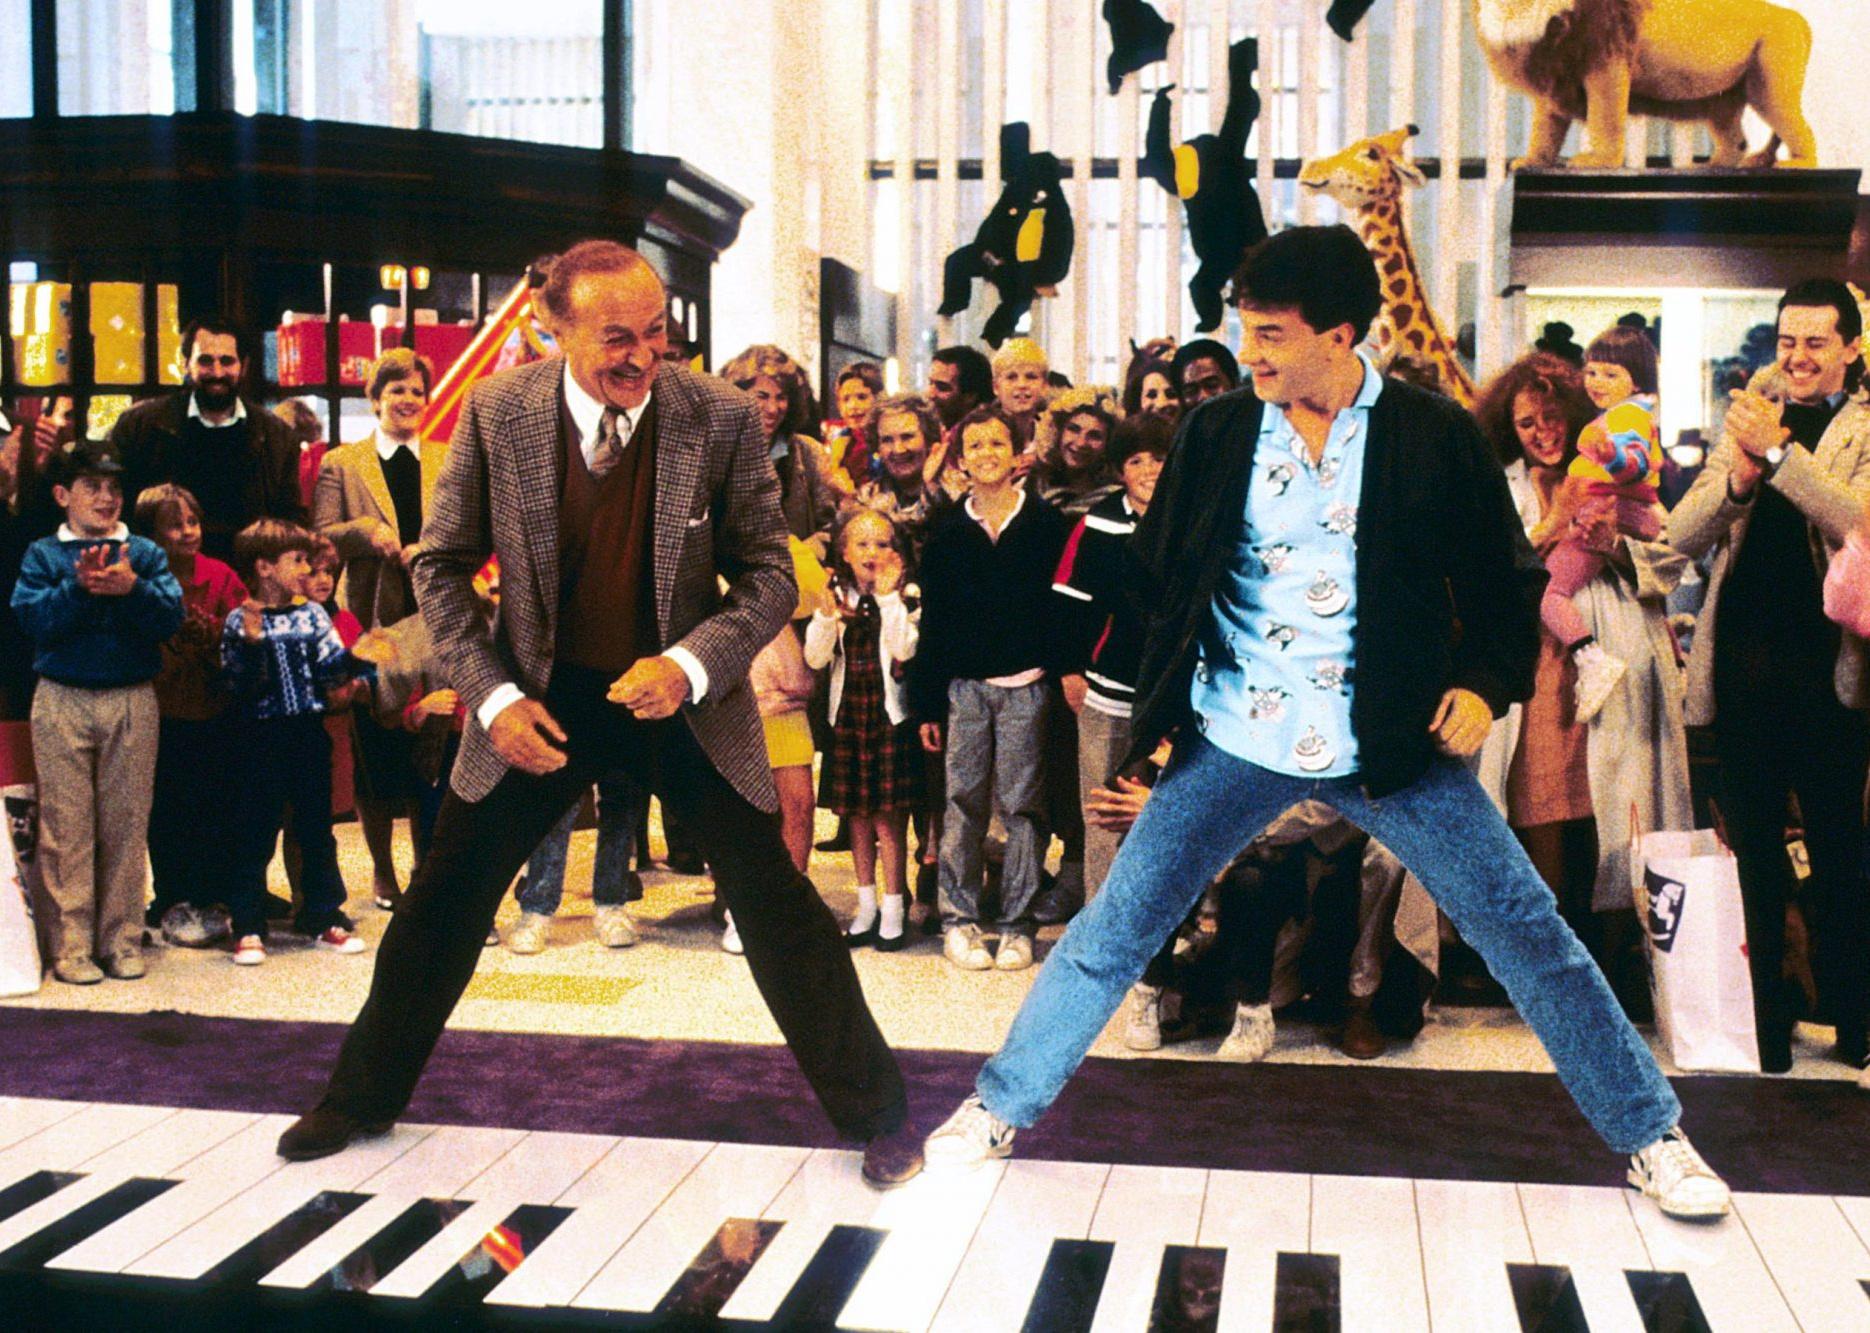 Tom Hanks dances on a giant foot piano in in a toy store.